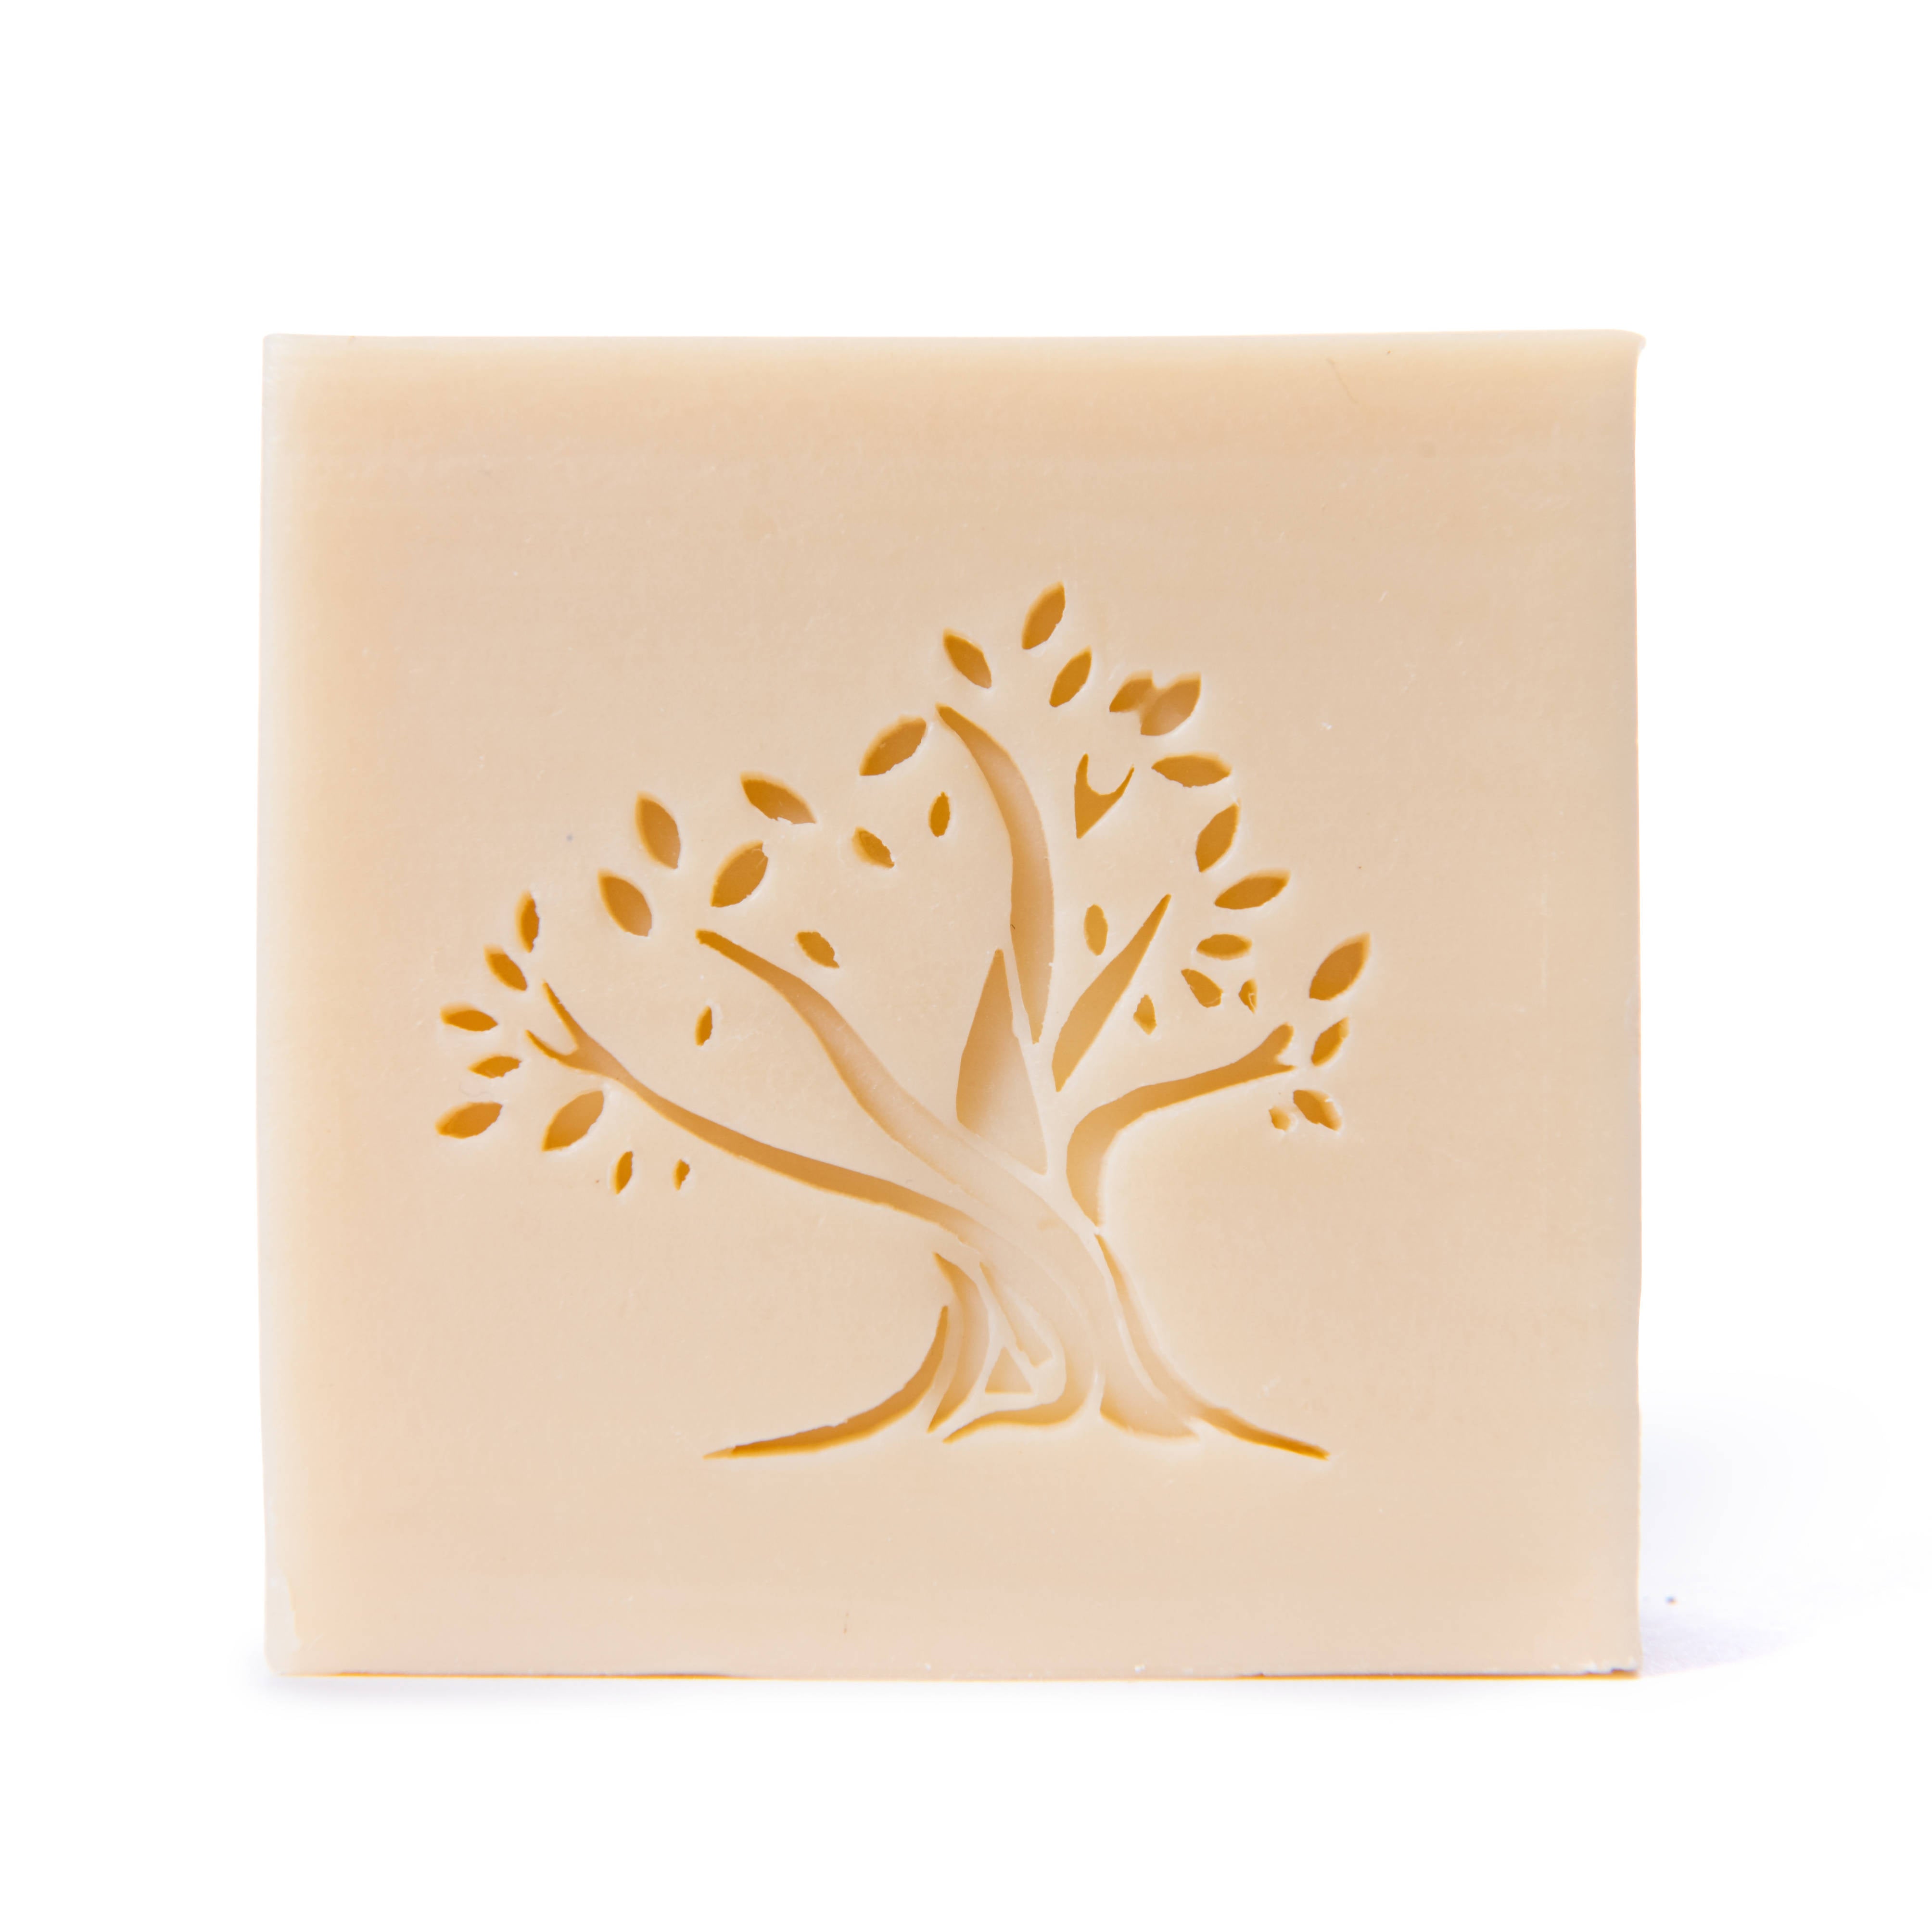 Handcrafted Handmade Hand Stamped artisanal soap ancestral recipe